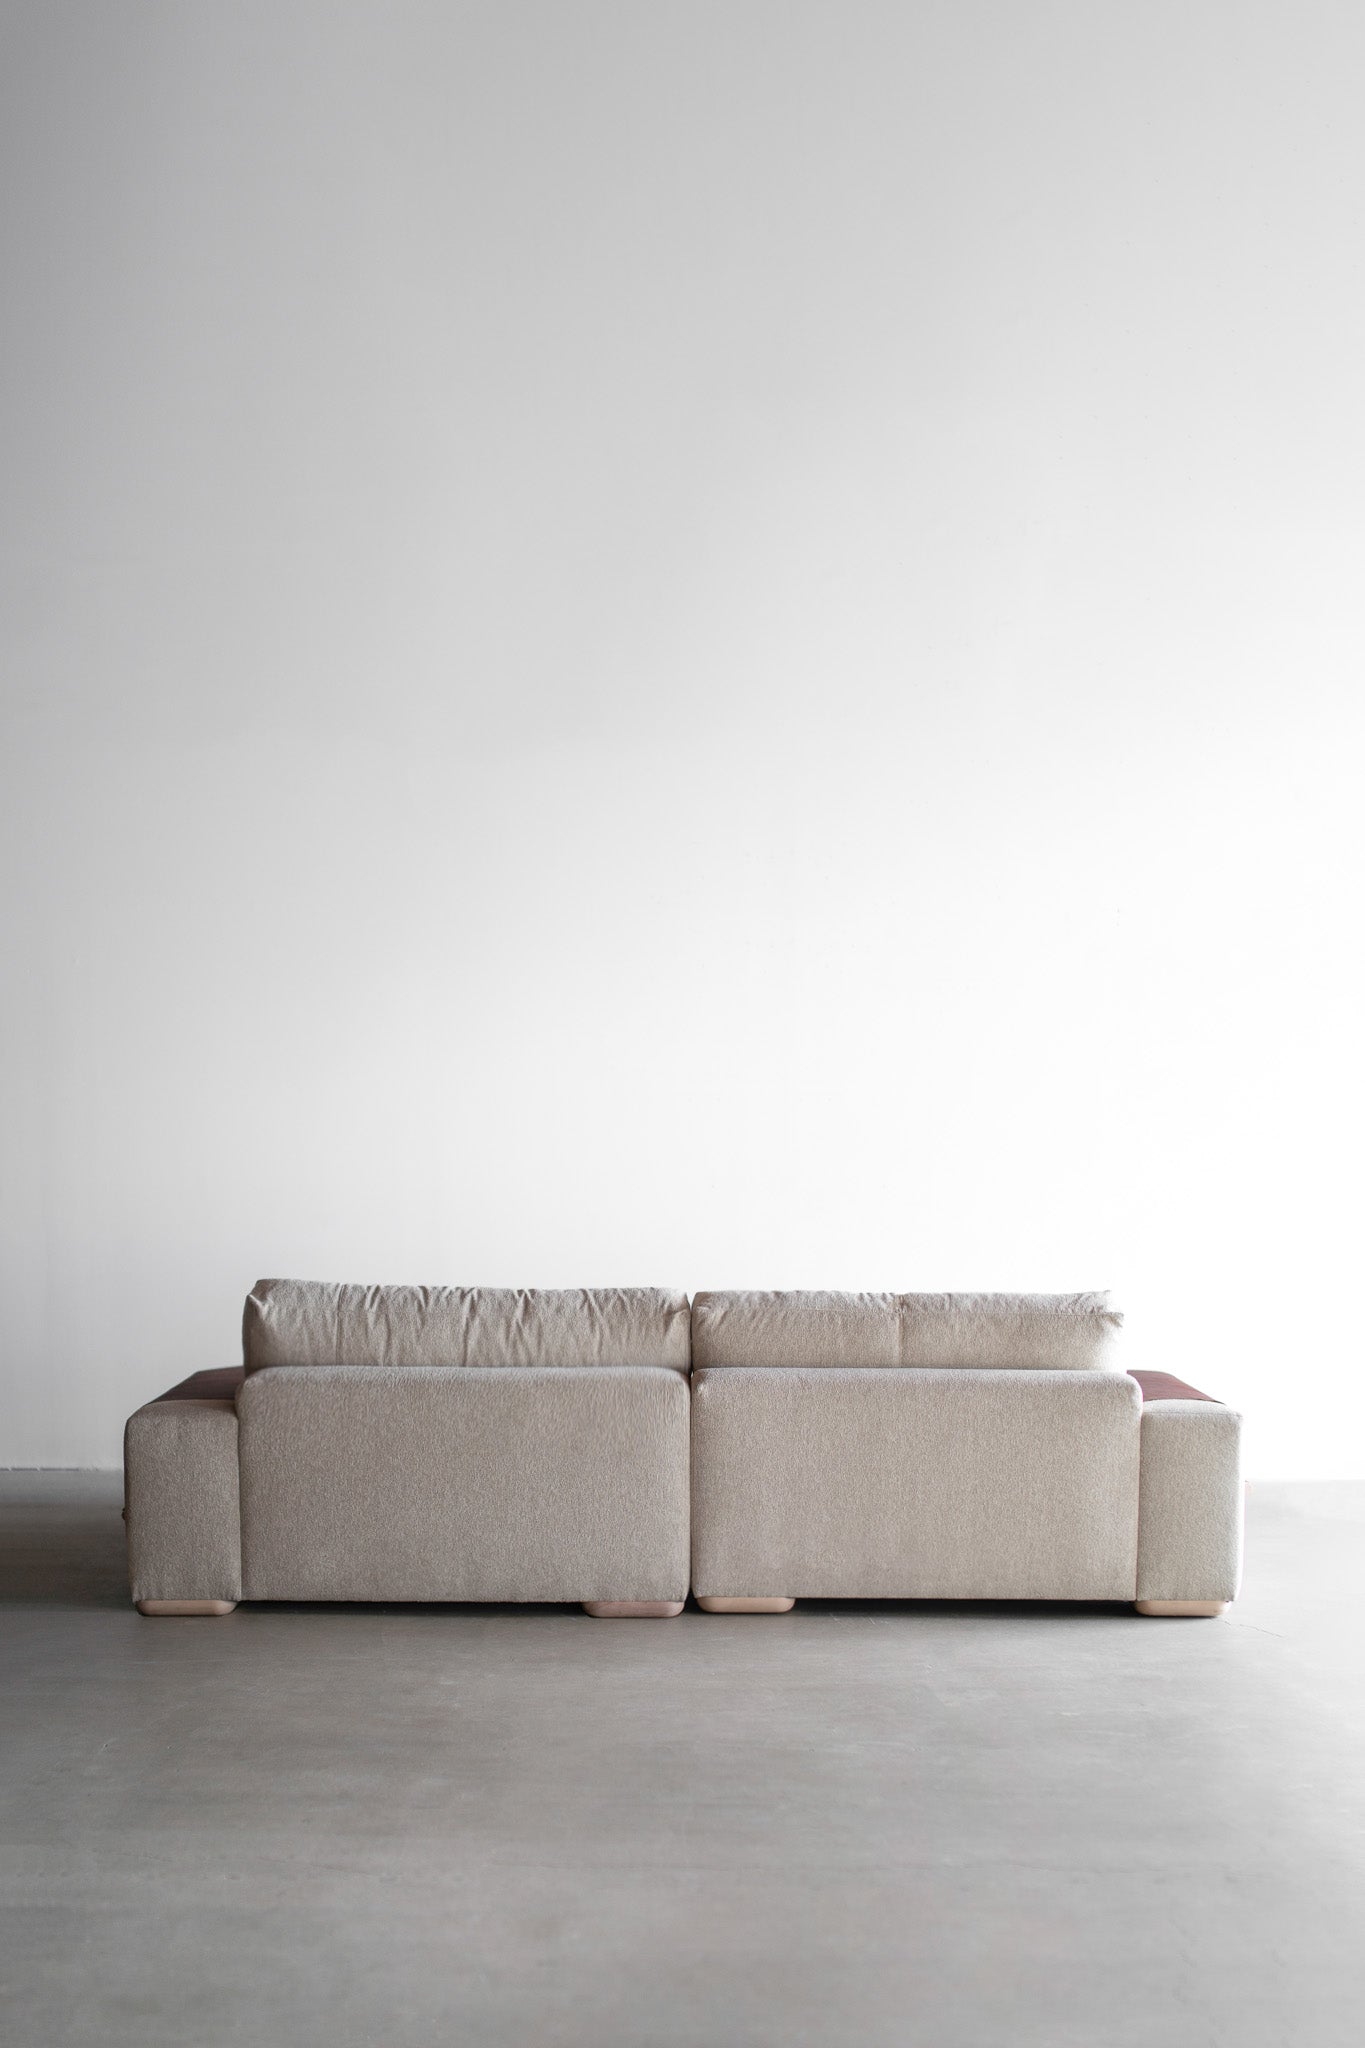 Back shot of Sofa with wood legs 